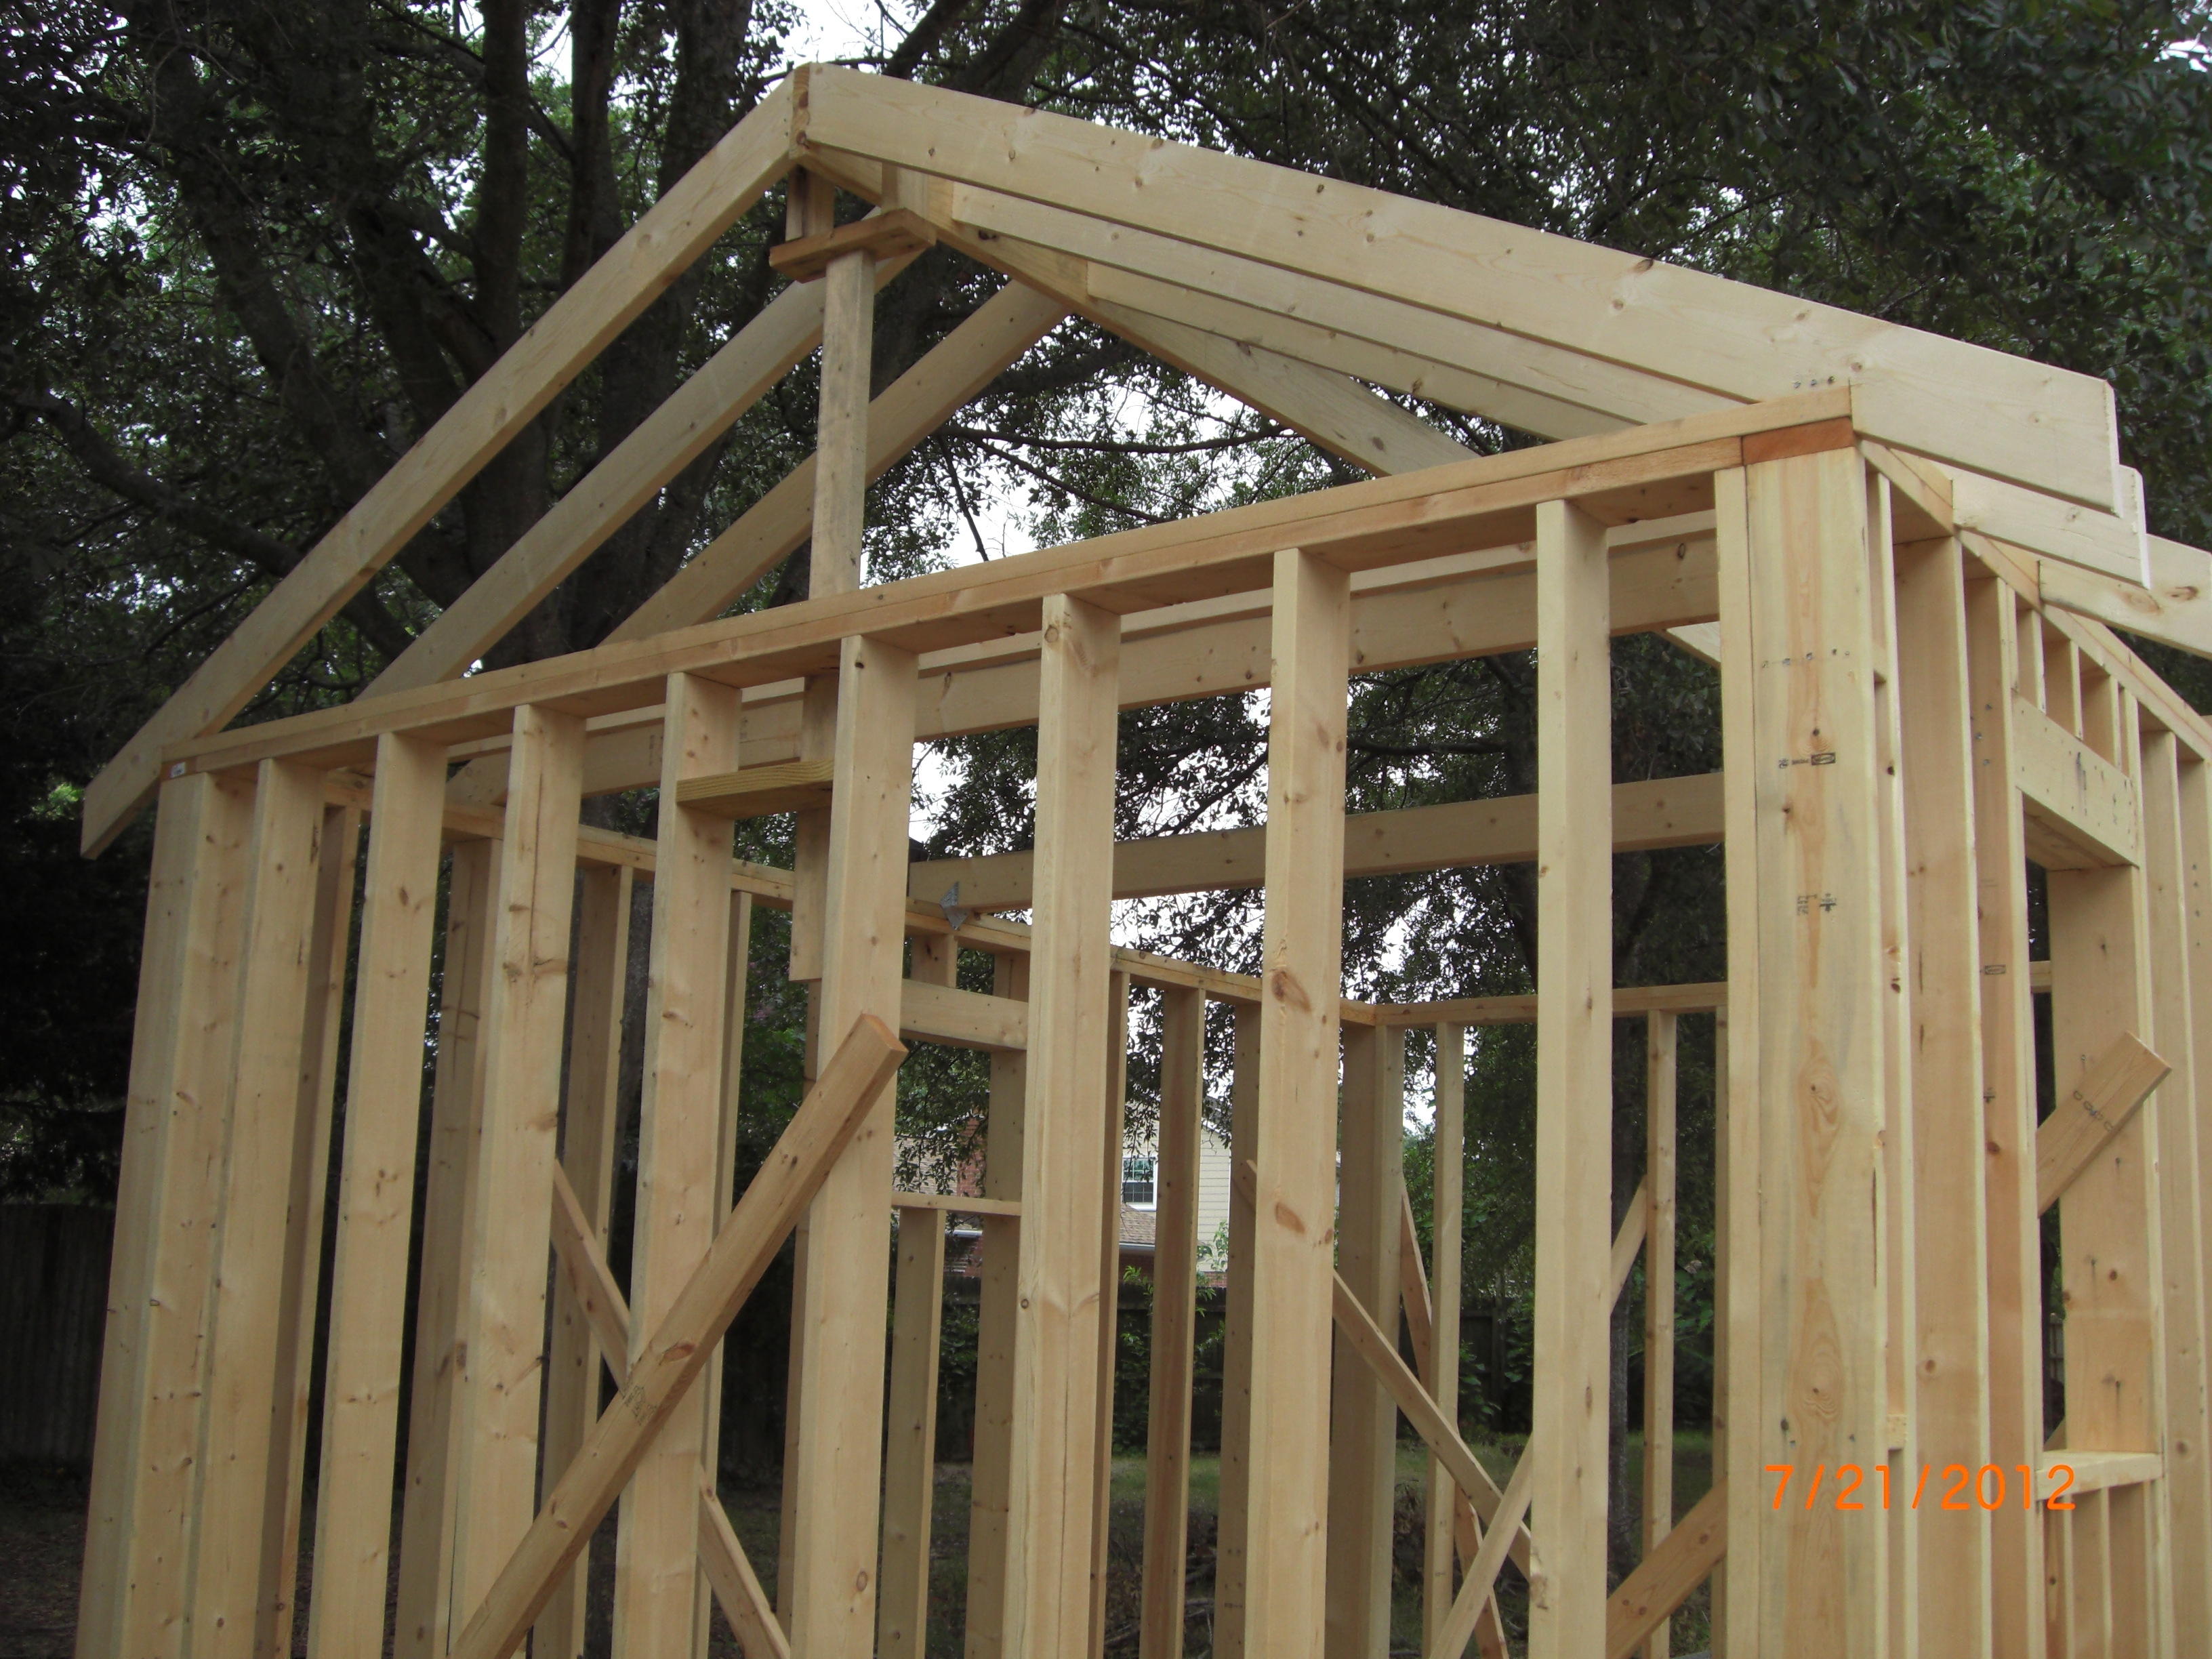 Church of the Holy Family Clothing Shed Construction: From start to finish